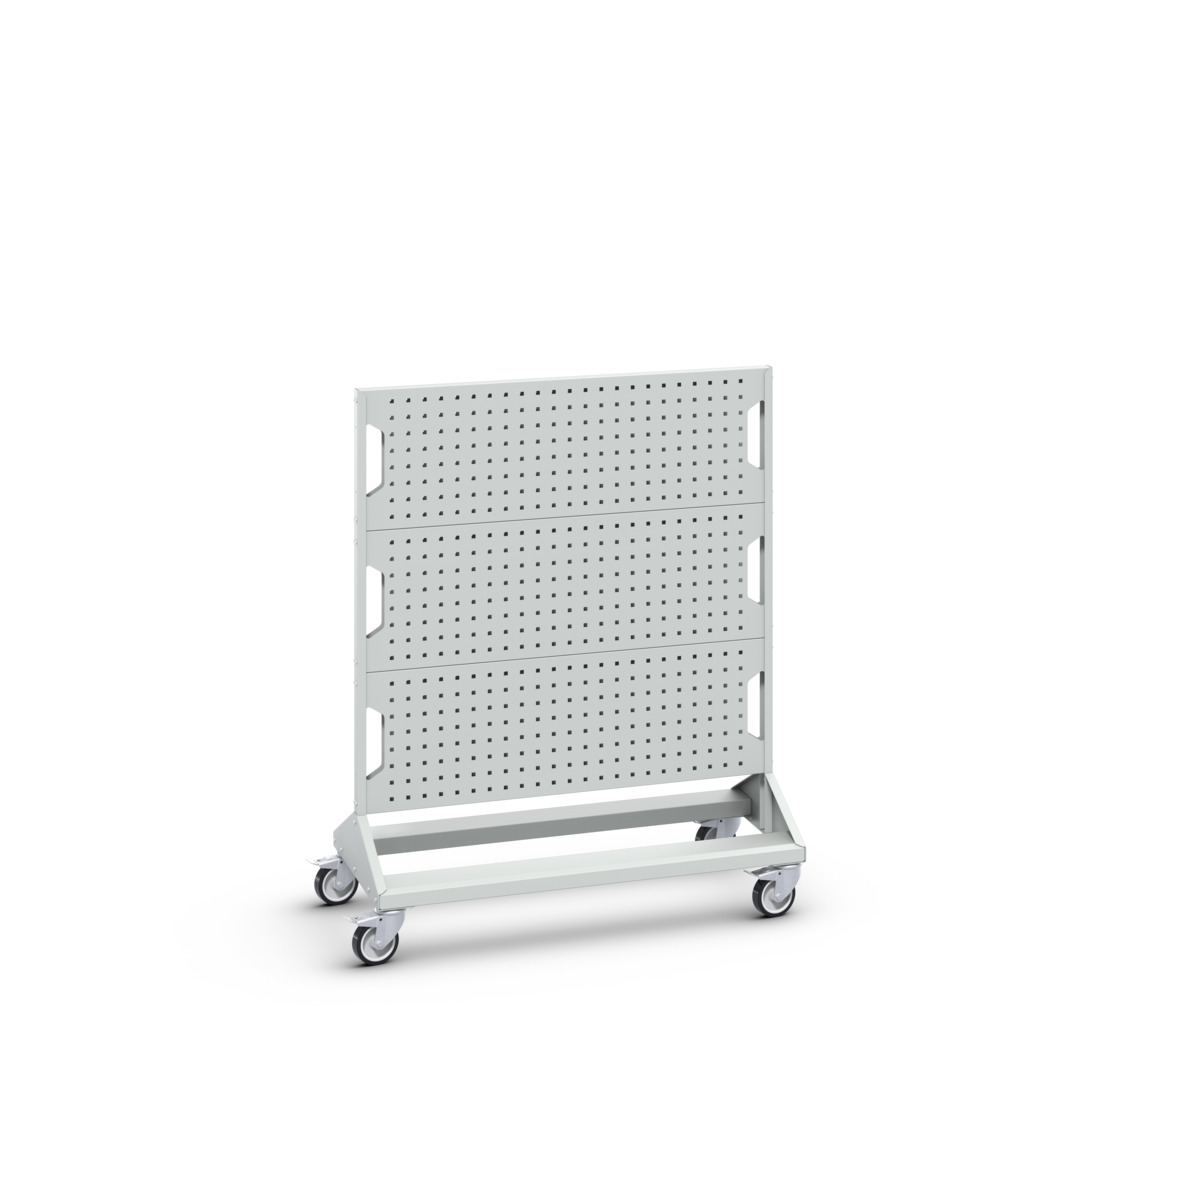 16917160.16V - perfo panel trolley double sided